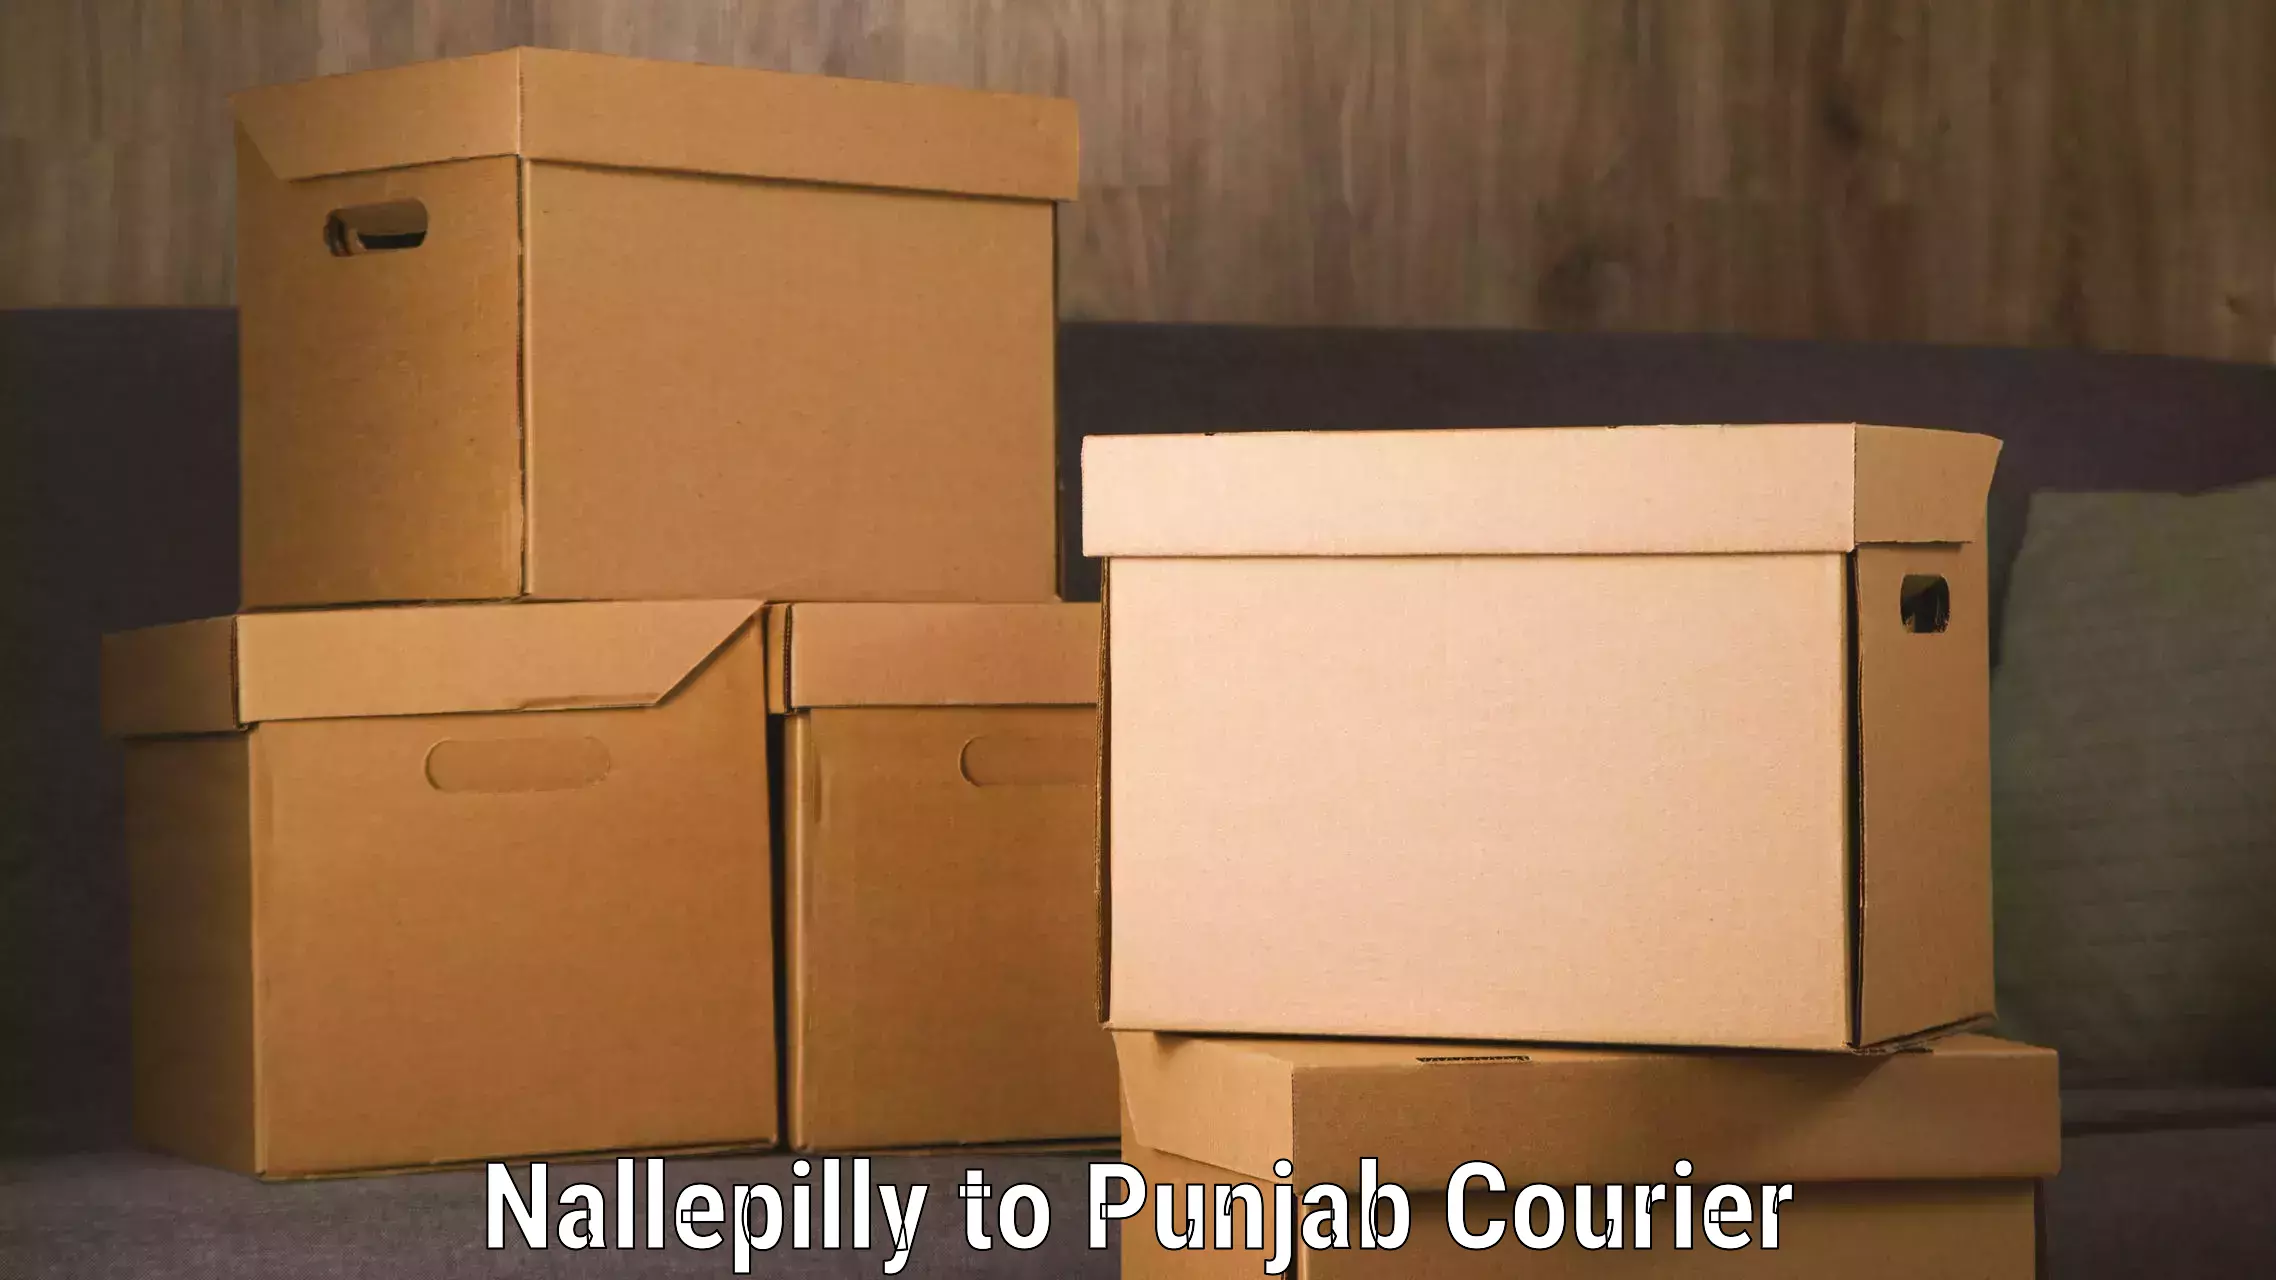 Fast delivery service Nallepilly to Rajpura